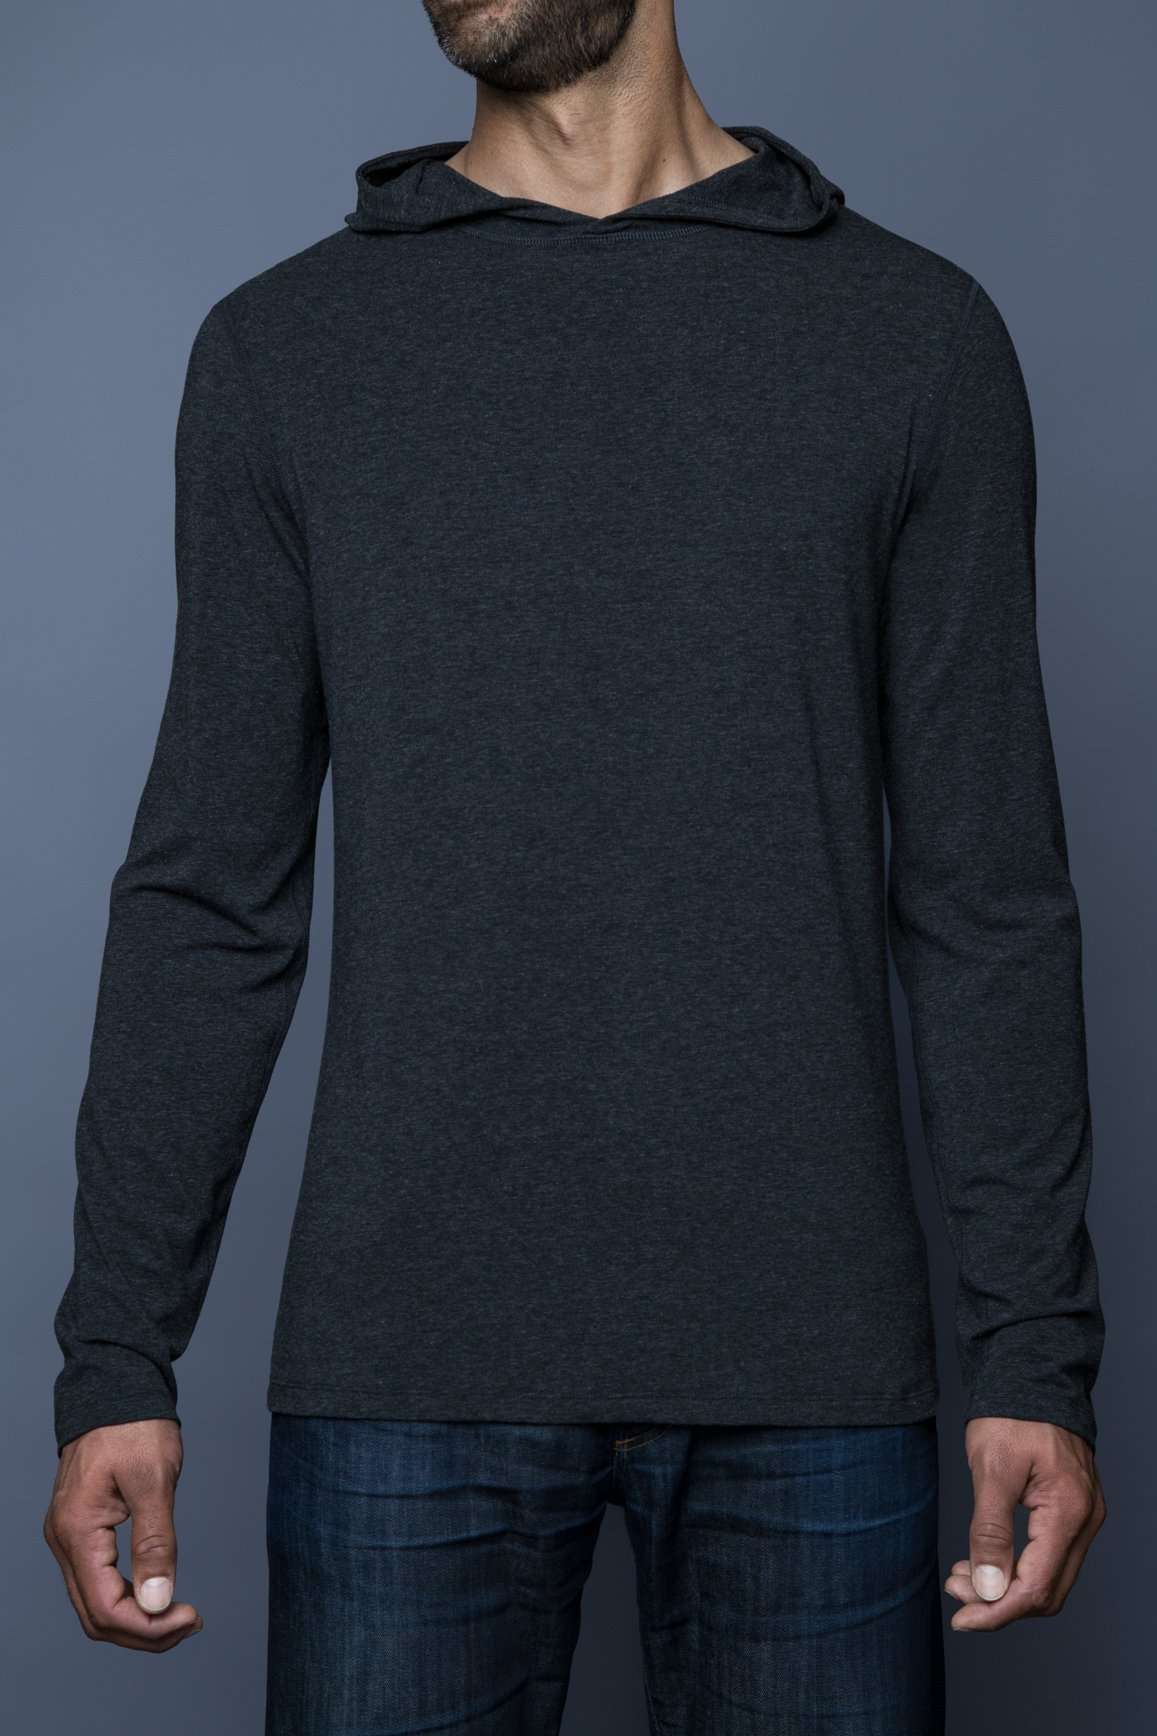 The Navas Lab Vasquez Microstripe long-sleeve hooded shirt for tall guys in Charcoal mix. The perfect tall slim shirt for tall and slim guys looking for style and comfort.